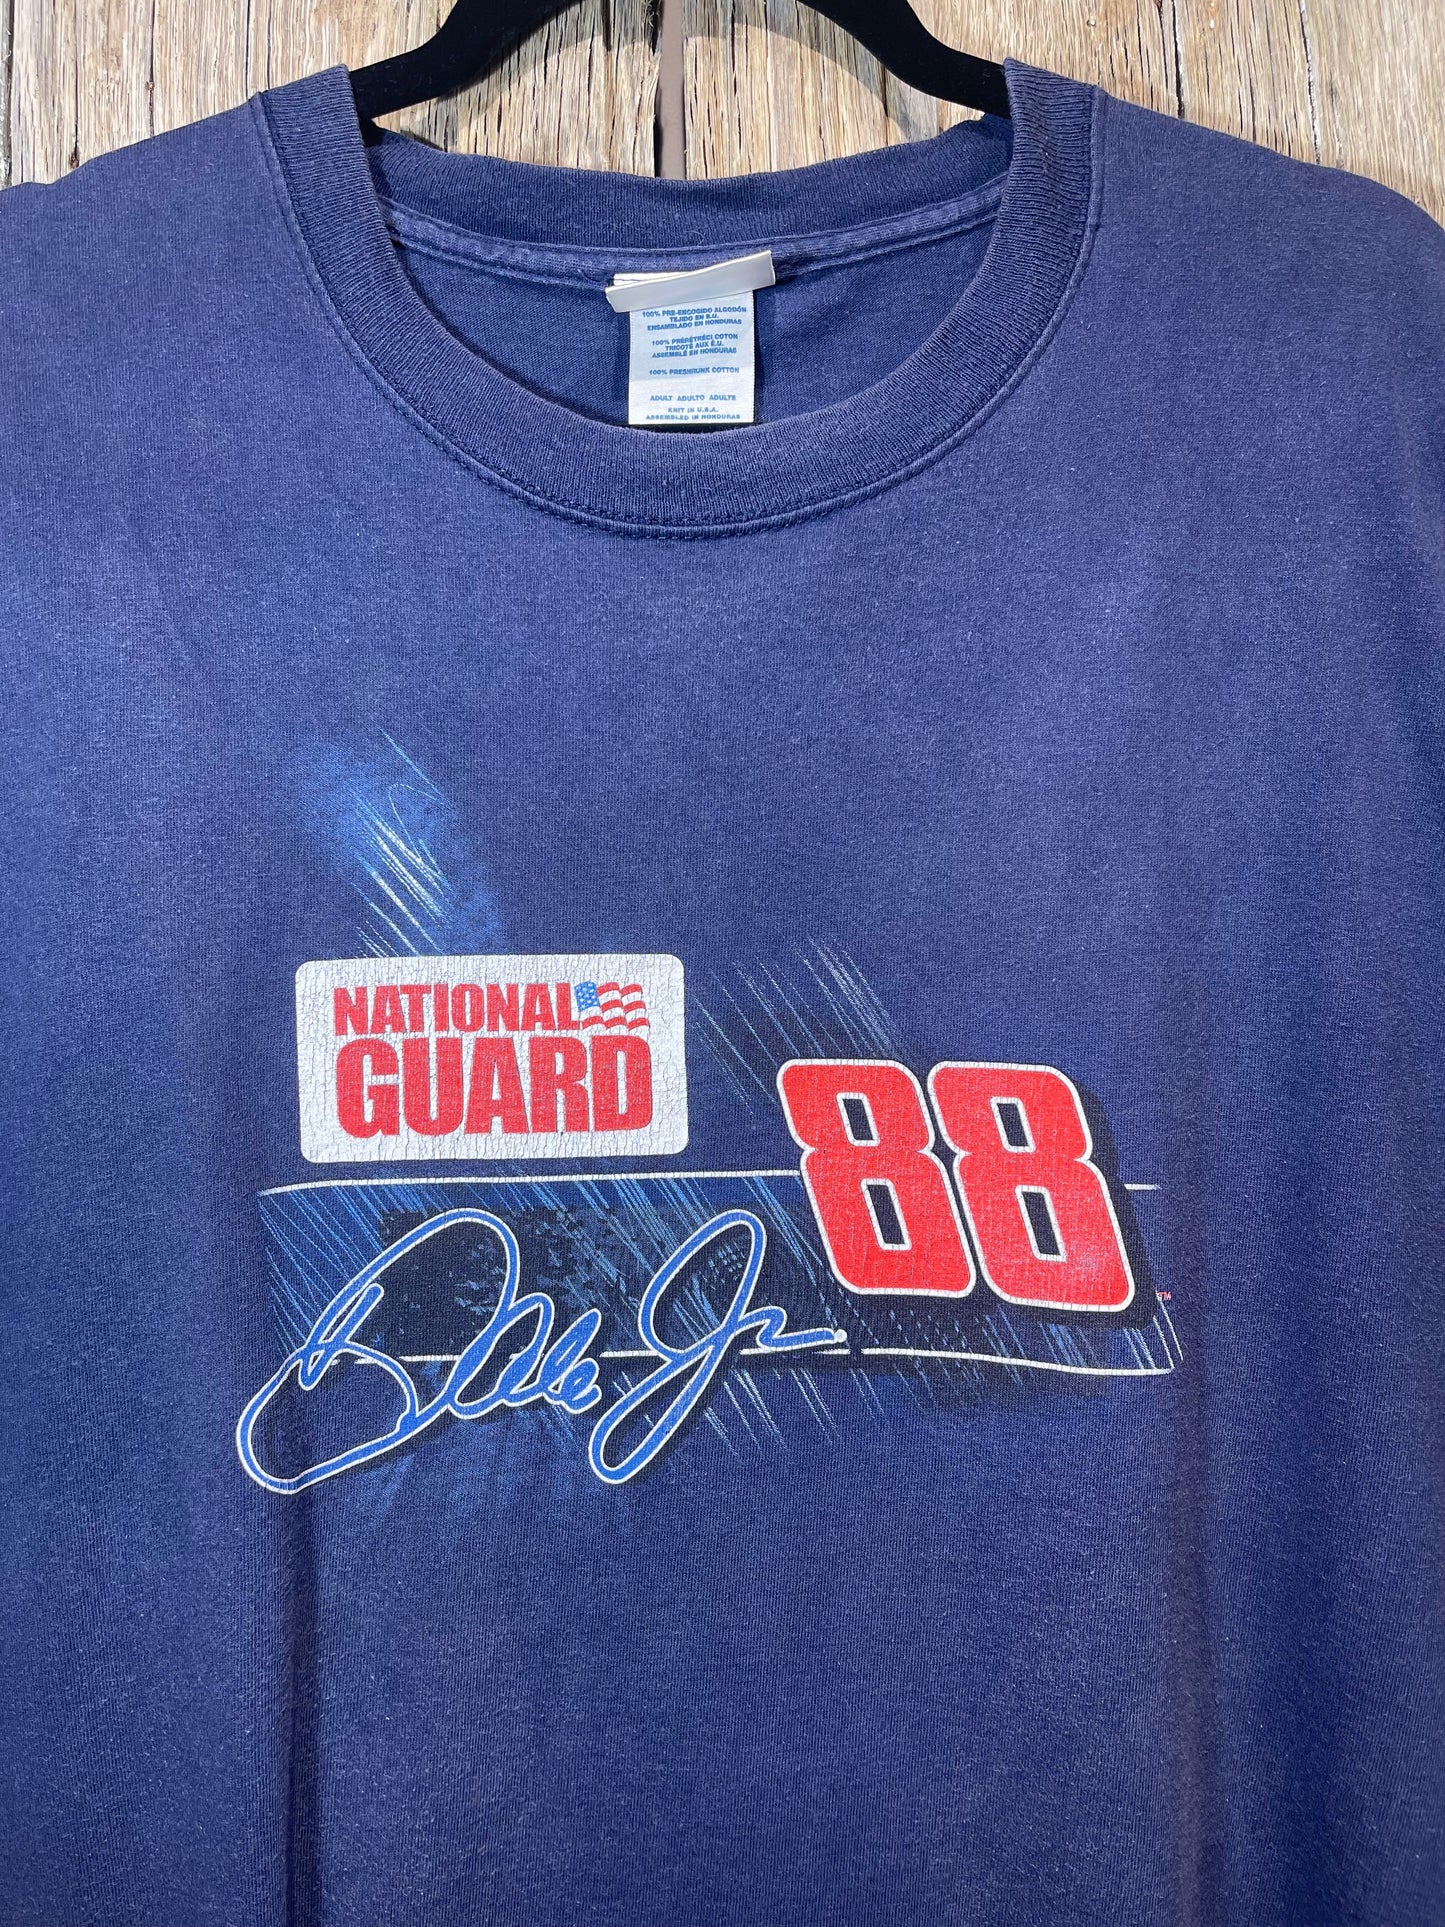 Vintage Blue National Guard Racing Graphic Tee